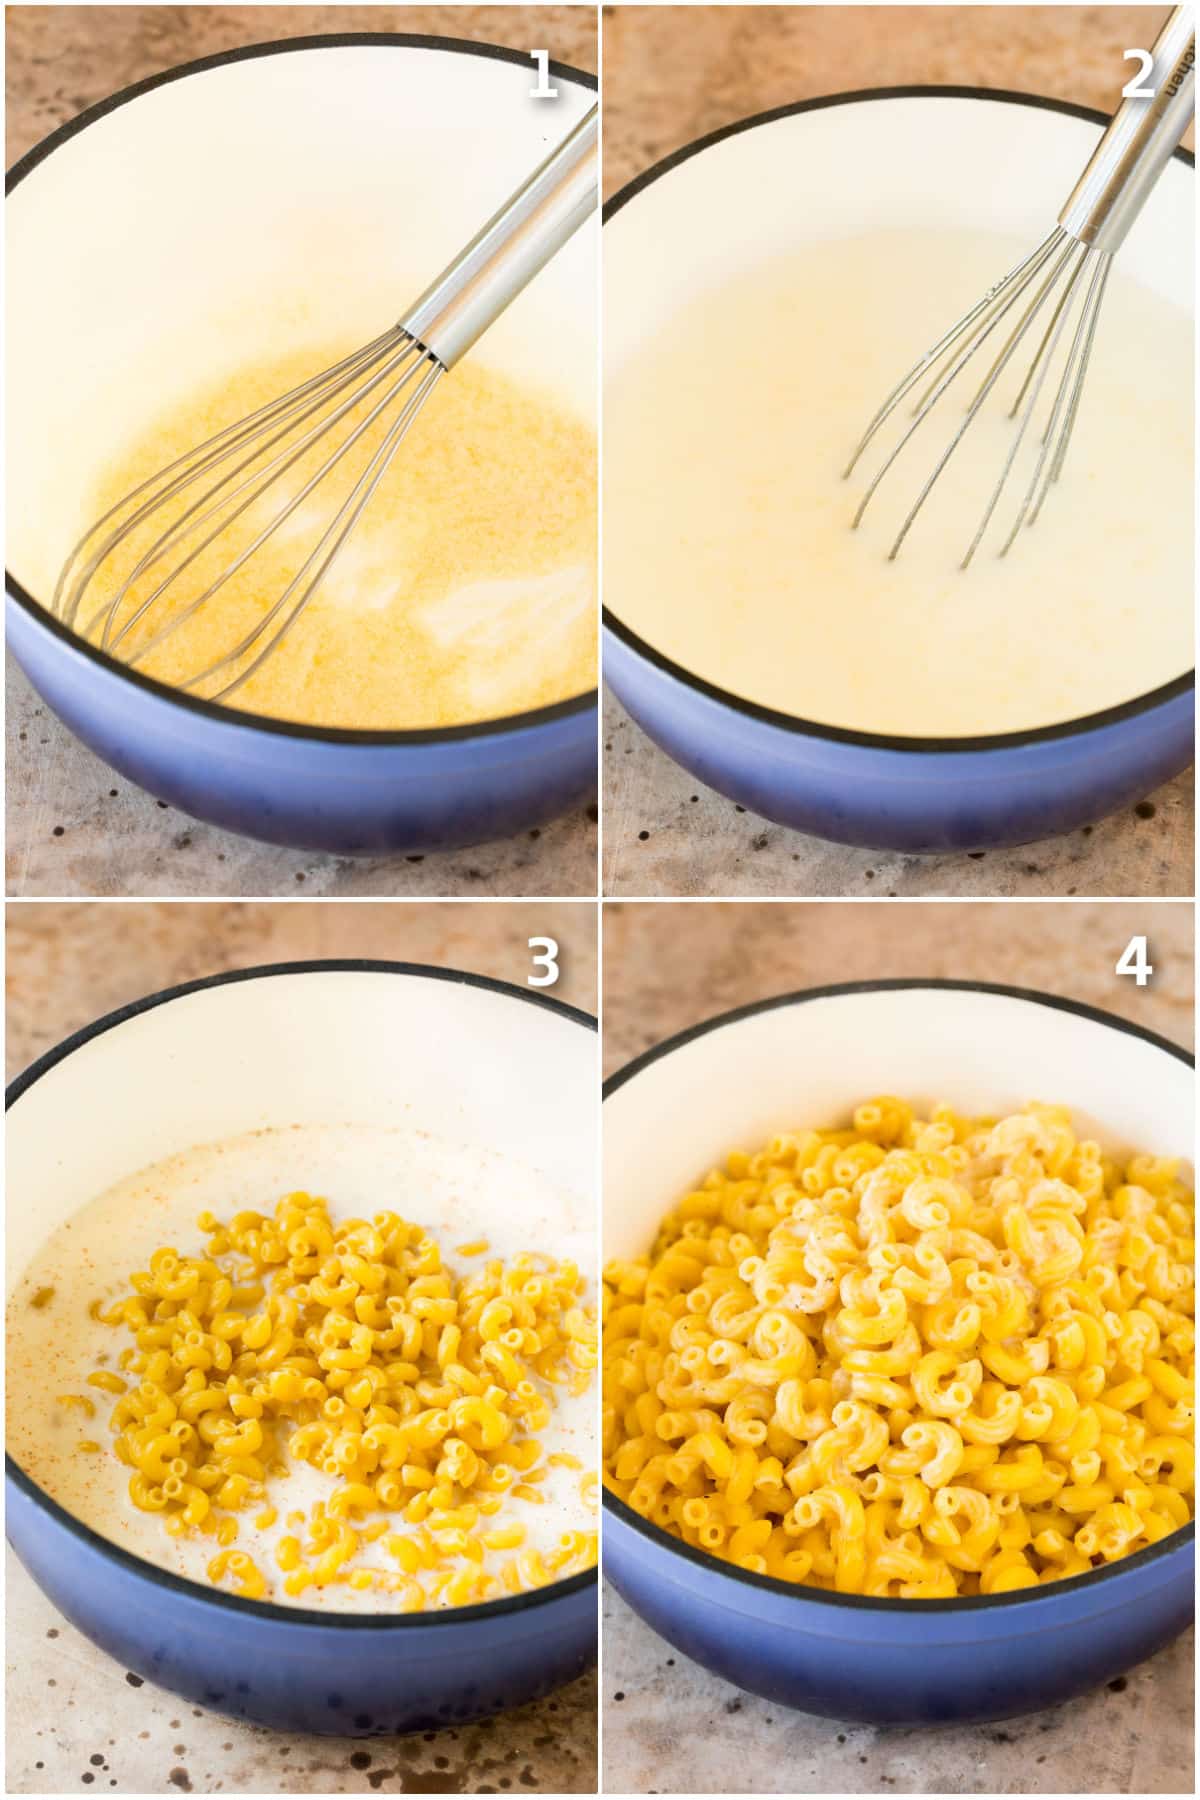 Process shots showing how to cook macaroni in a white sauce.